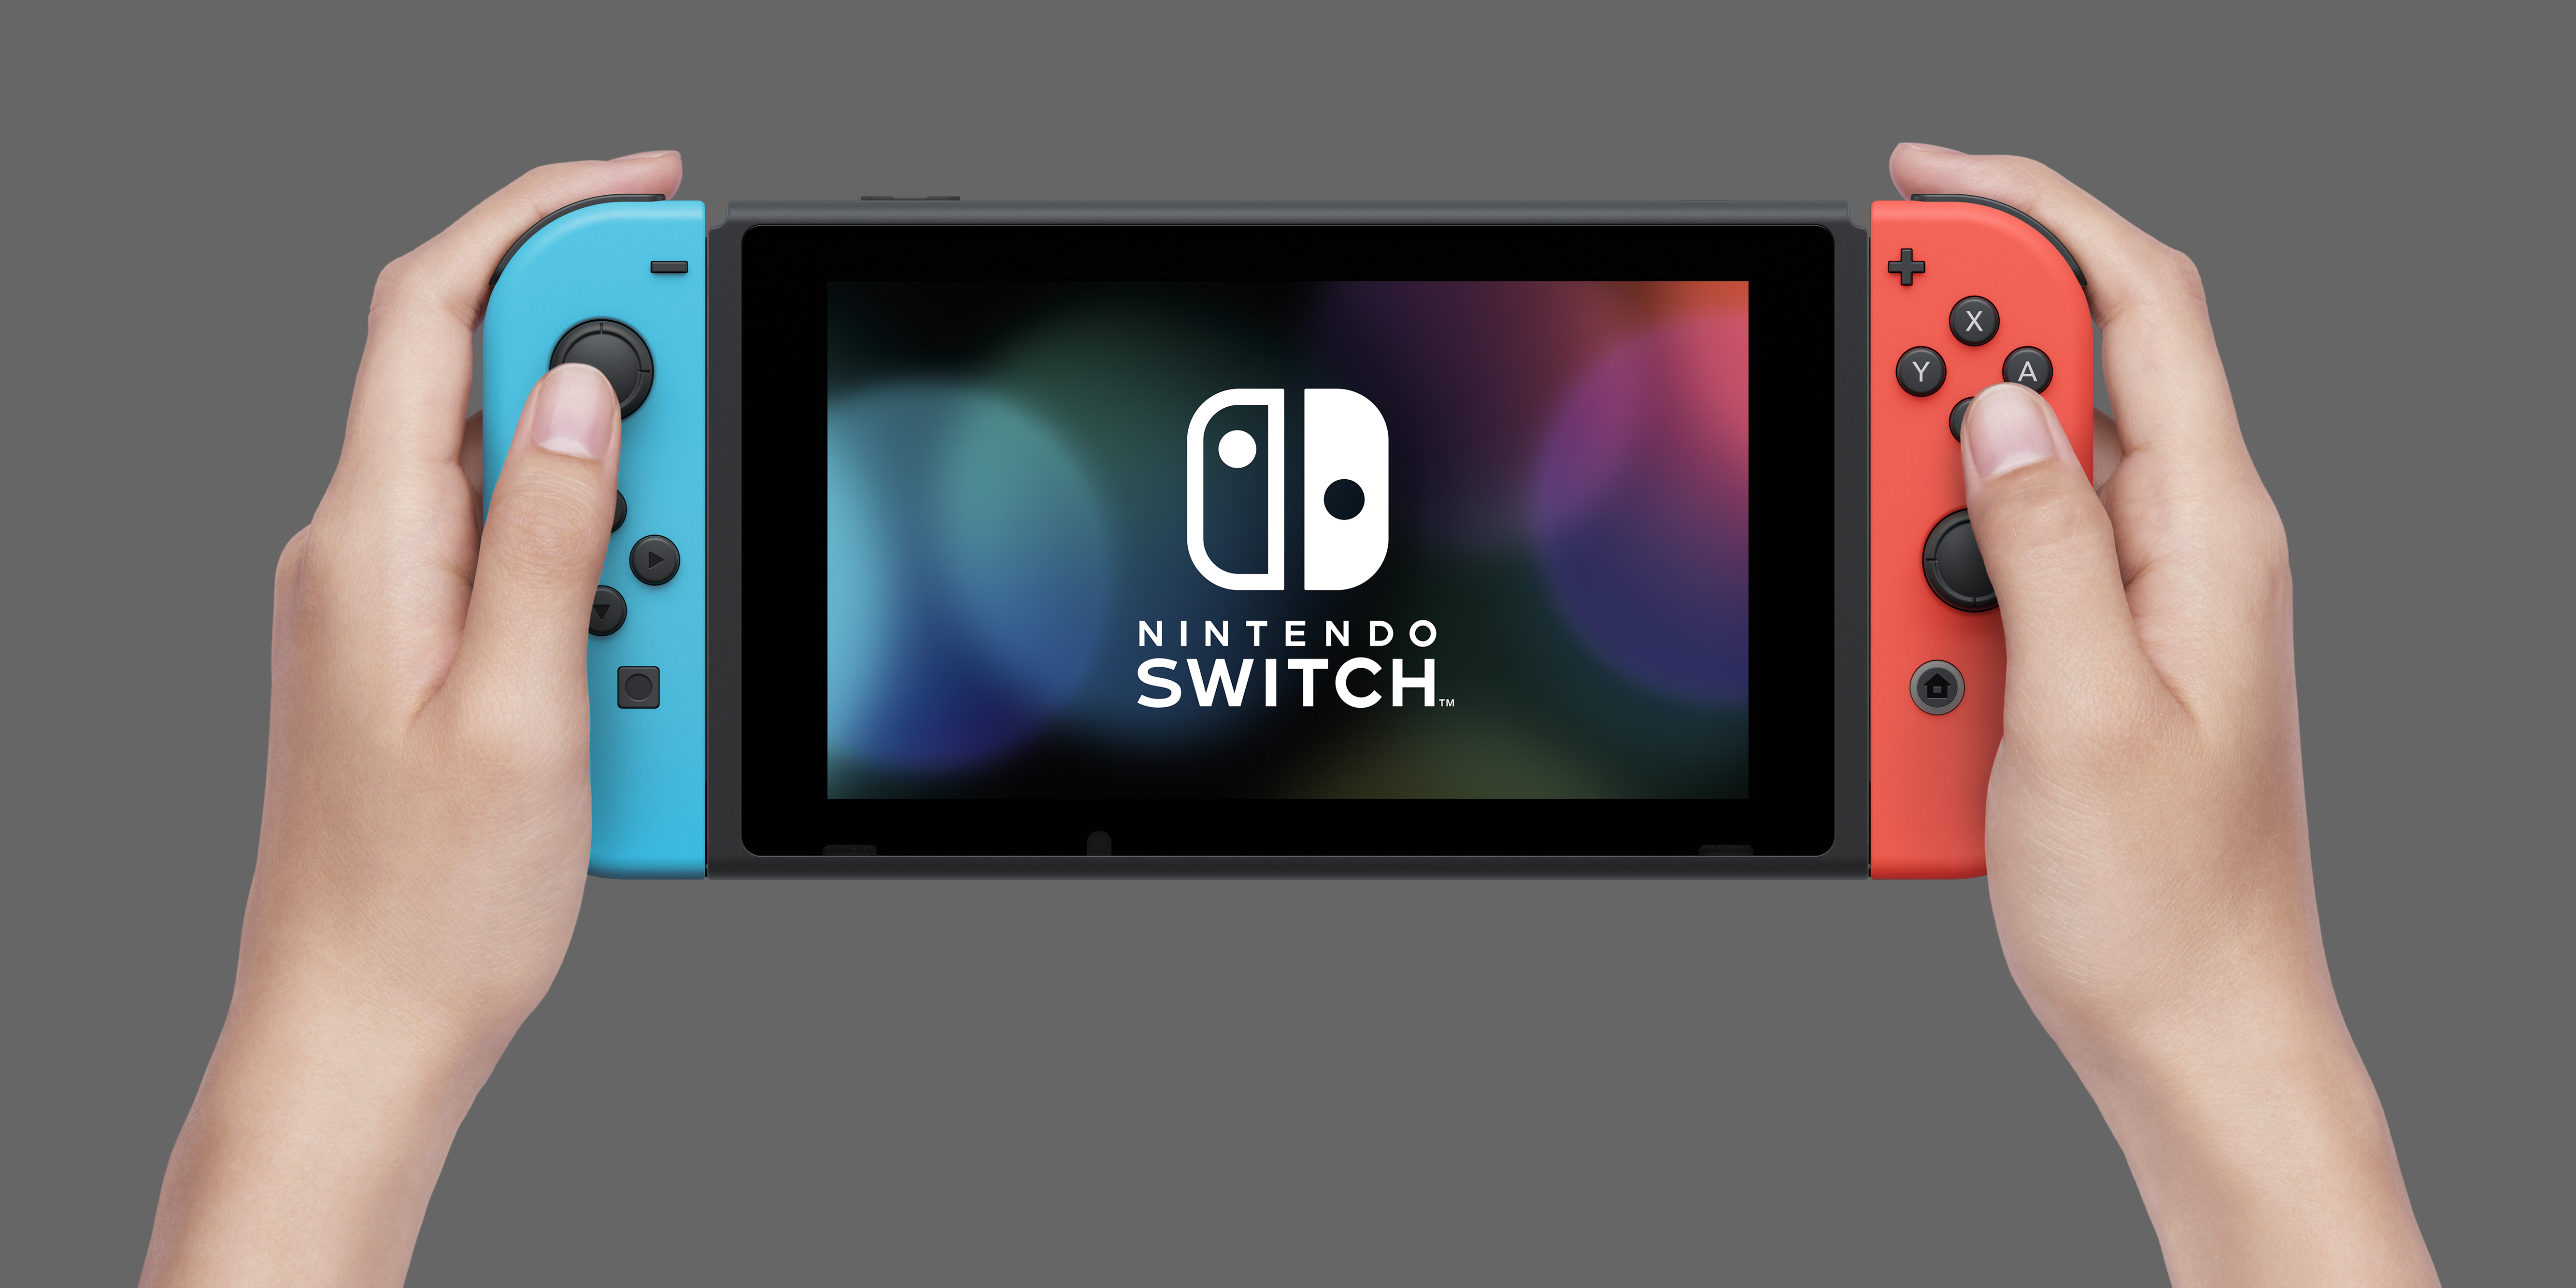 Nintendo - Switch v2 (updated battery) 32GB Console - Neon Red/Neon Blue Joy-Con